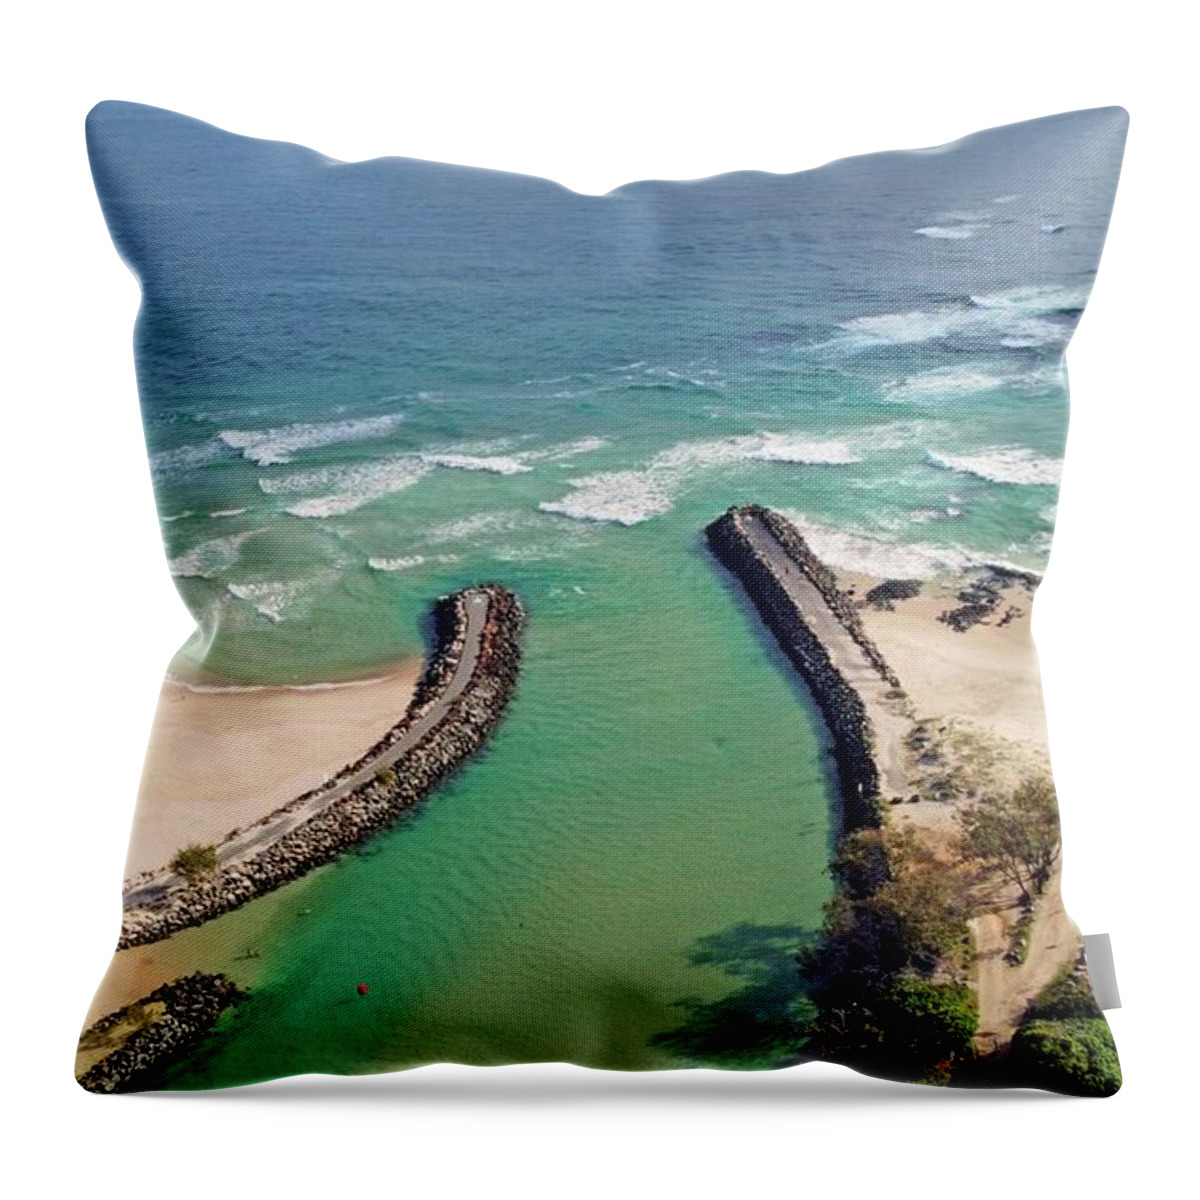 Kingscliff Throw Pillow featuring the photograph Kingscliff Creek by Andre Petrov